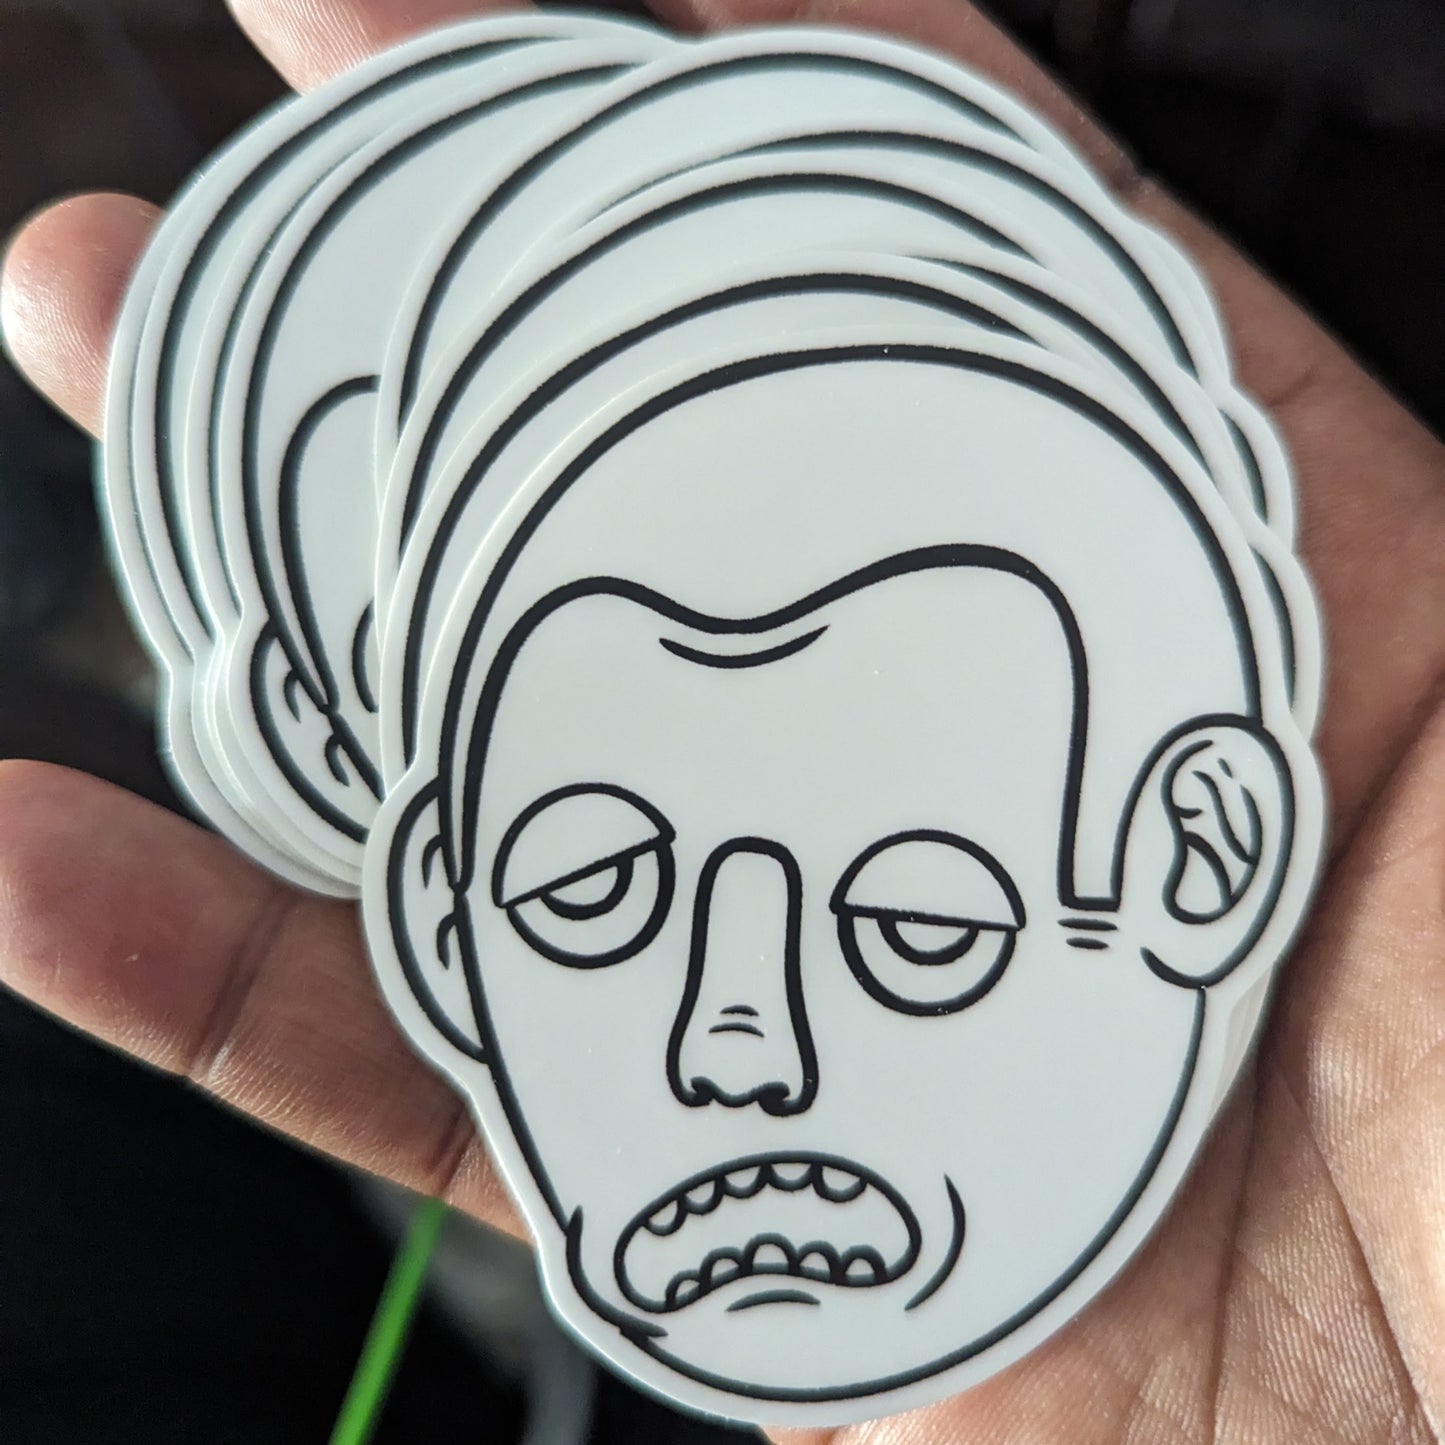 One Dumb Face STiCKER by One Dumb Shop